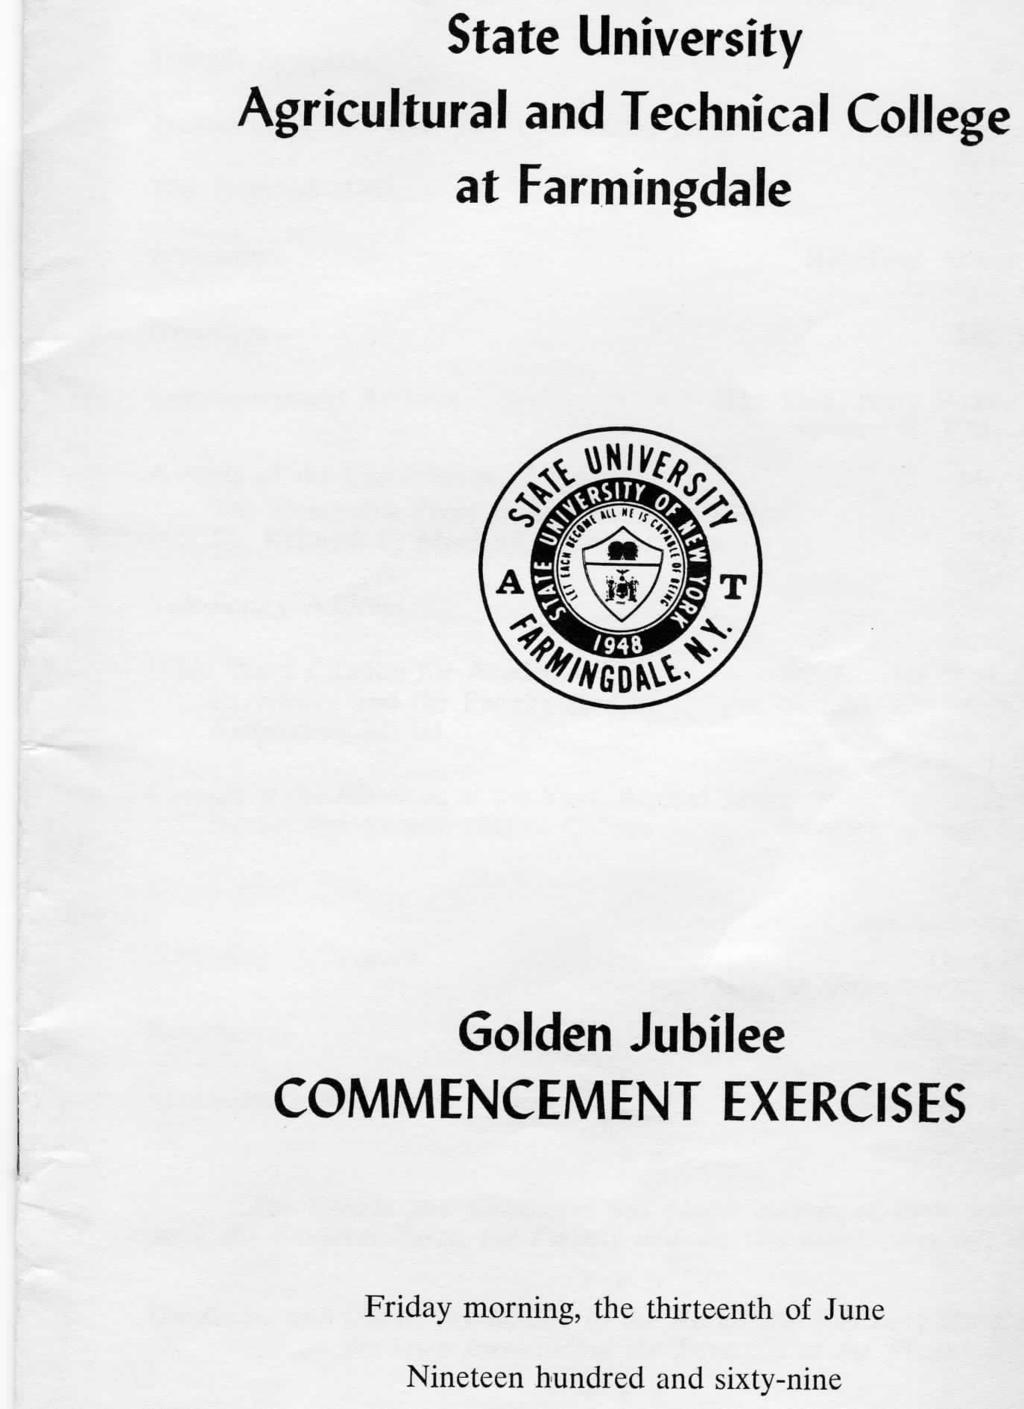 State University Agricultural and Technical College at Farmingdale Golden Jubilee